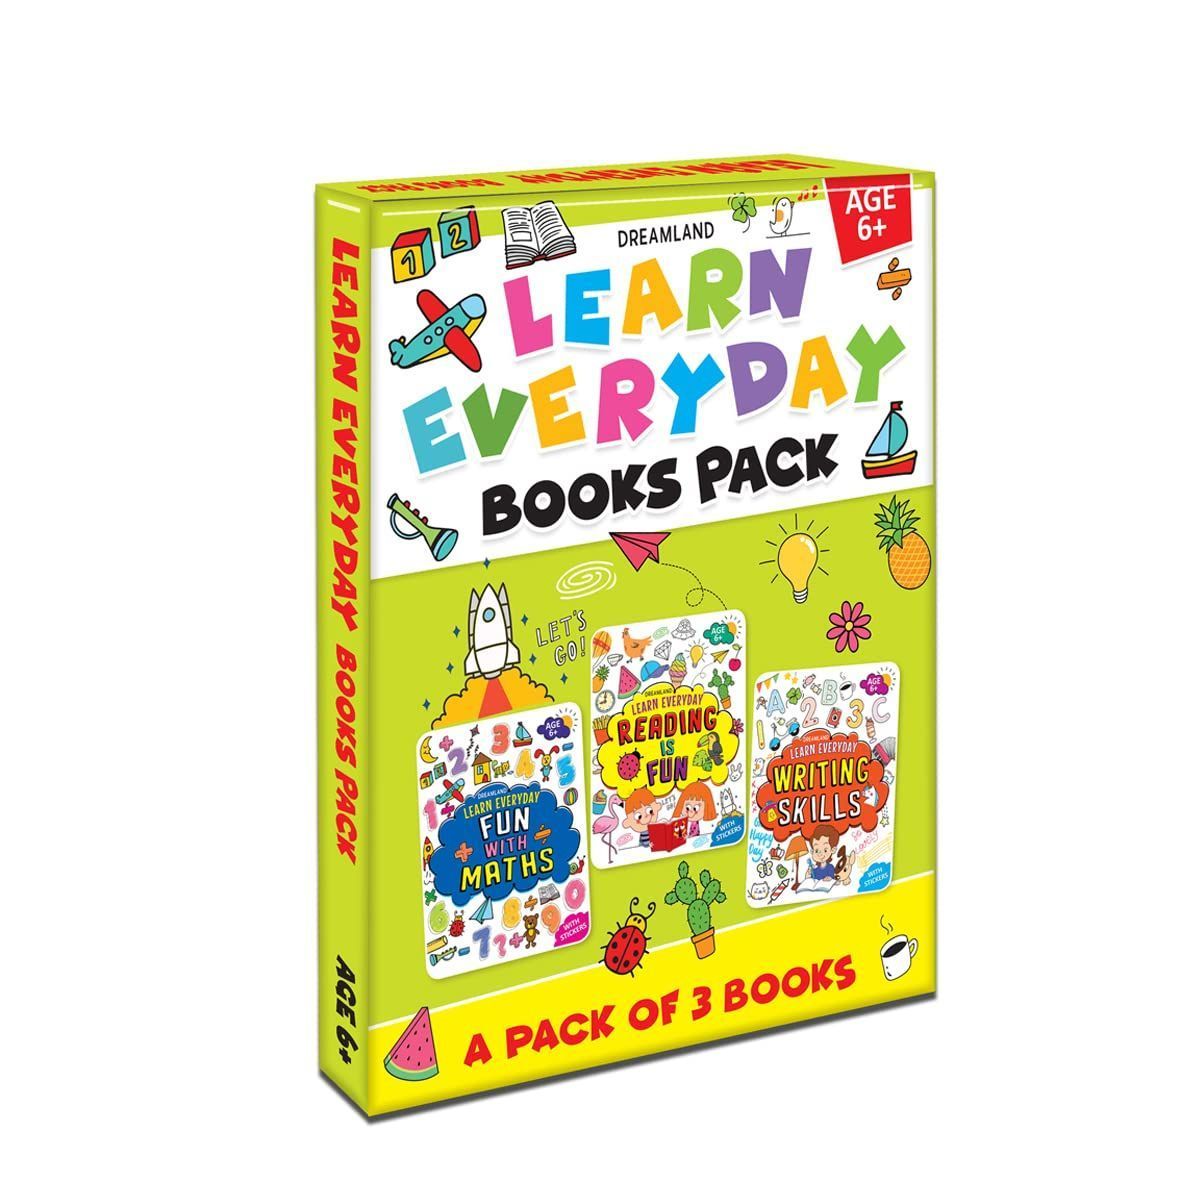 Learn Everyday Books Pack Age 6+ - A Set of 3 Books - Reading is Fun, Fun with Maths, Writing Skills Dreamland Publications